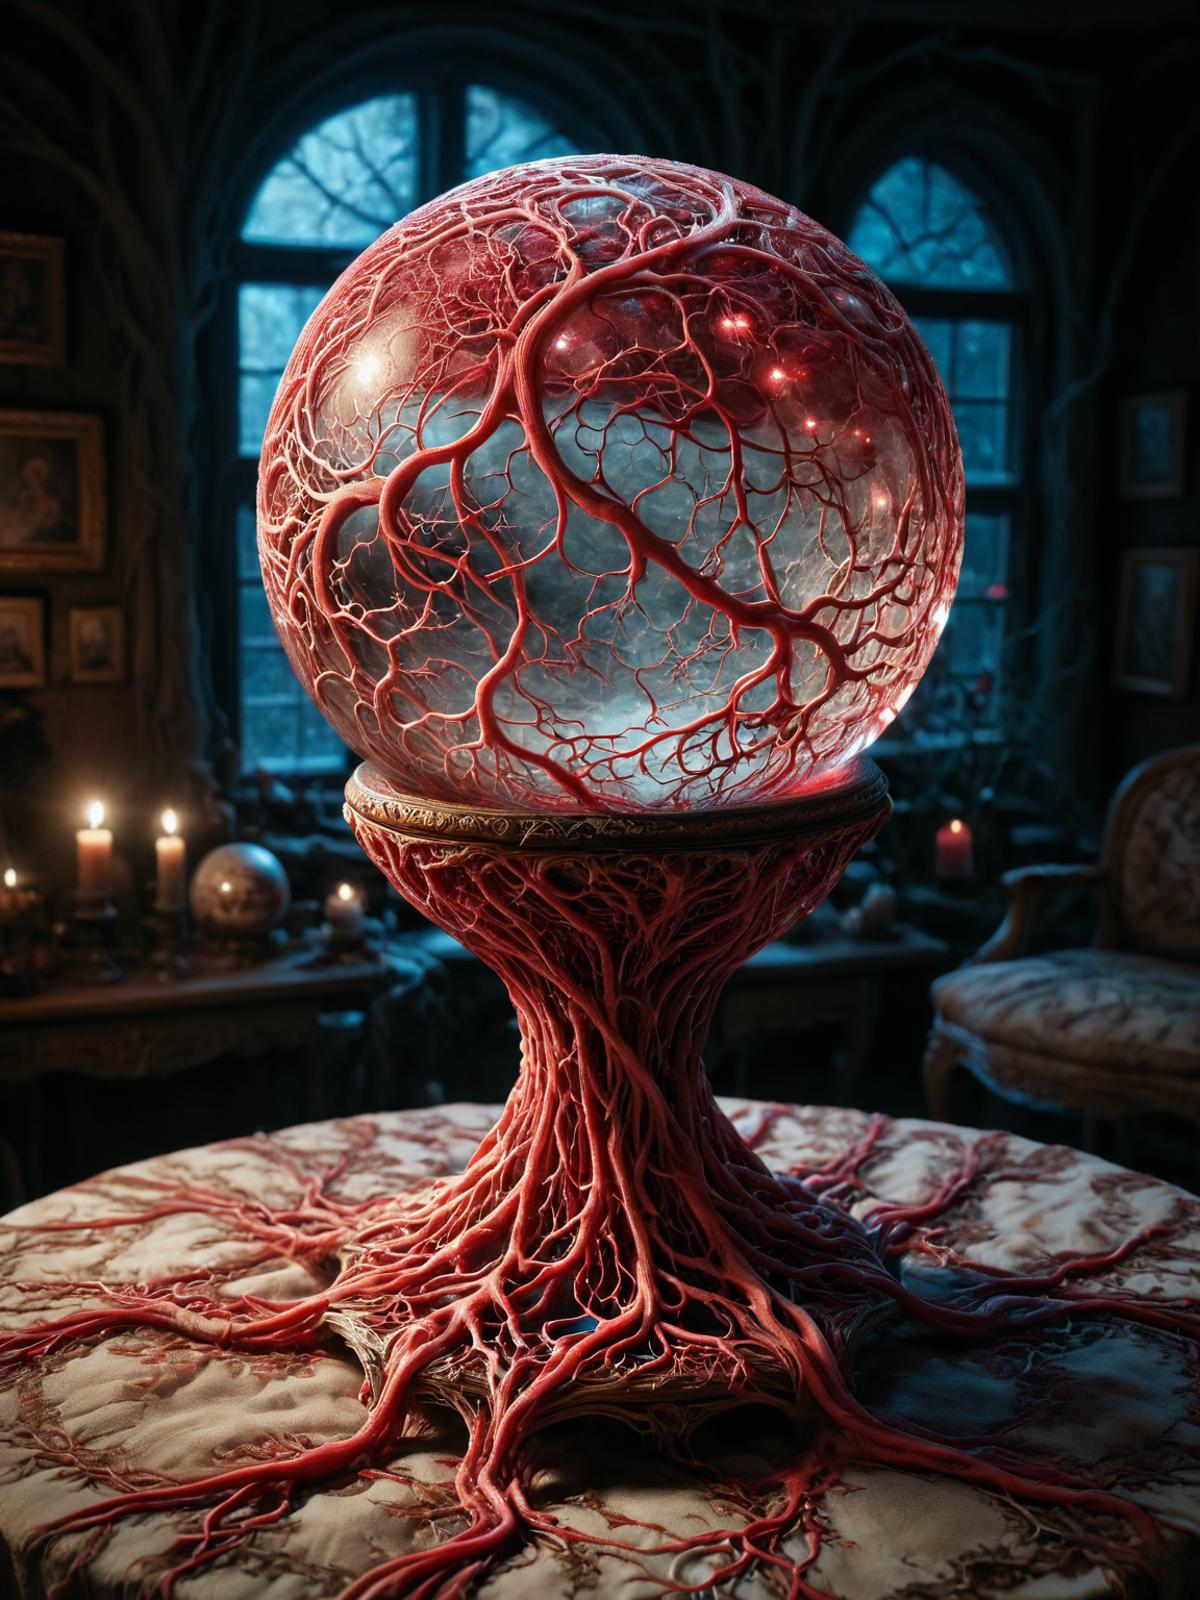 A Red Heart-Shaped Globe Sitting on a Table